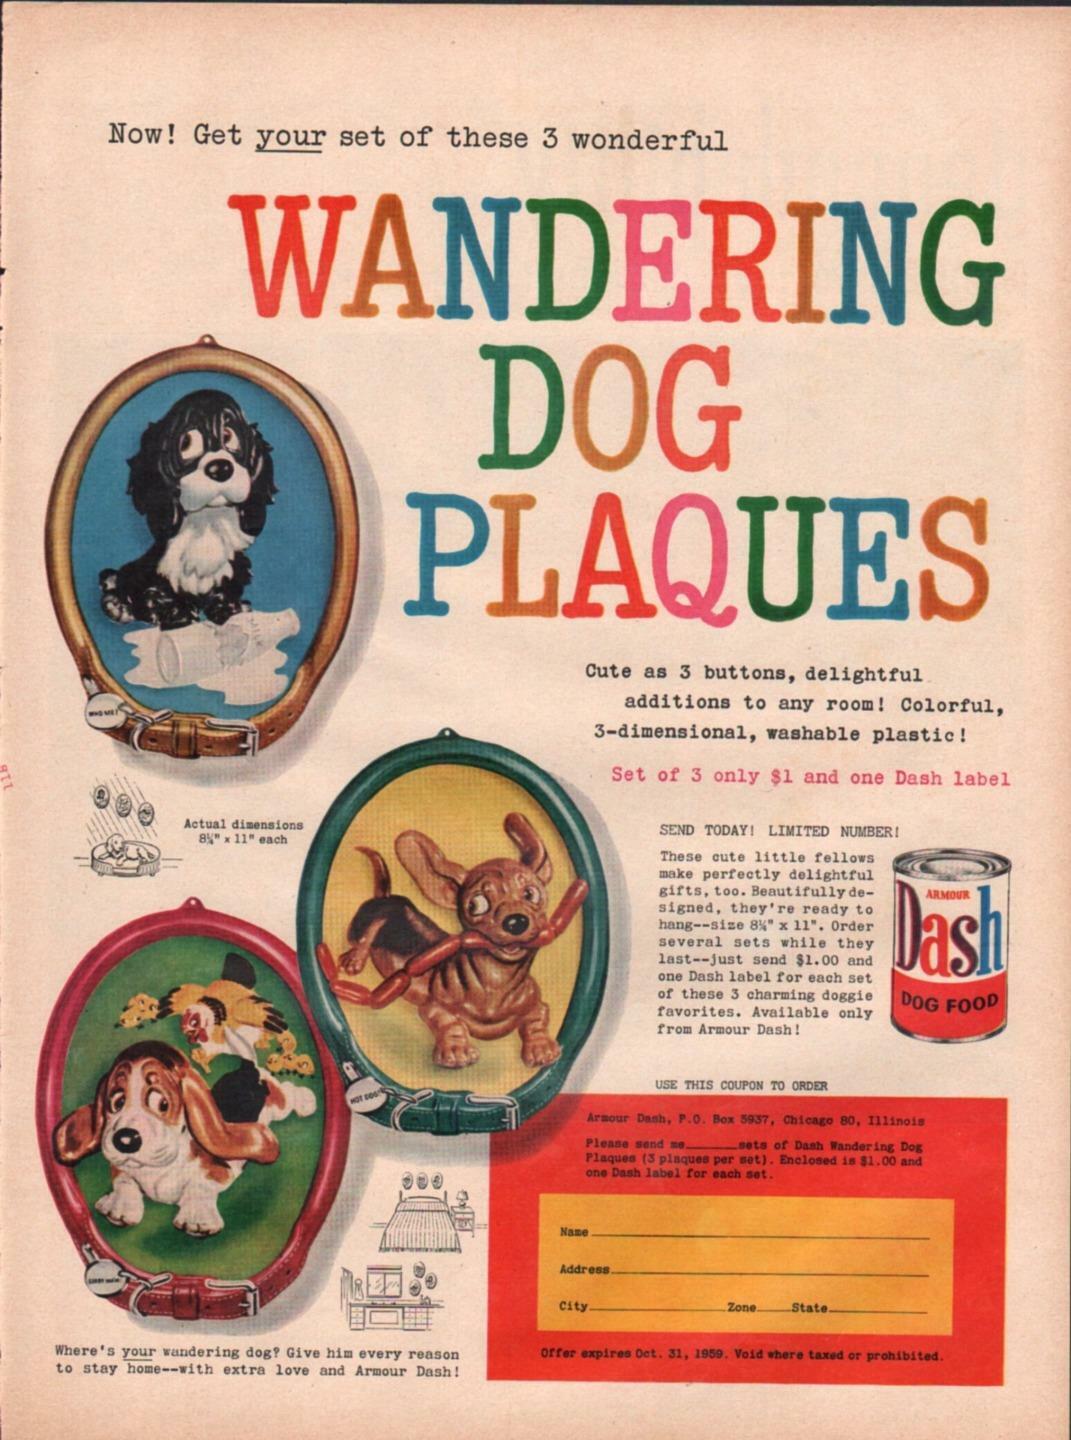 1959 Armour PRINT AD Dash Dog Food Featuring Wandering Dog Plaques Basset Doxie